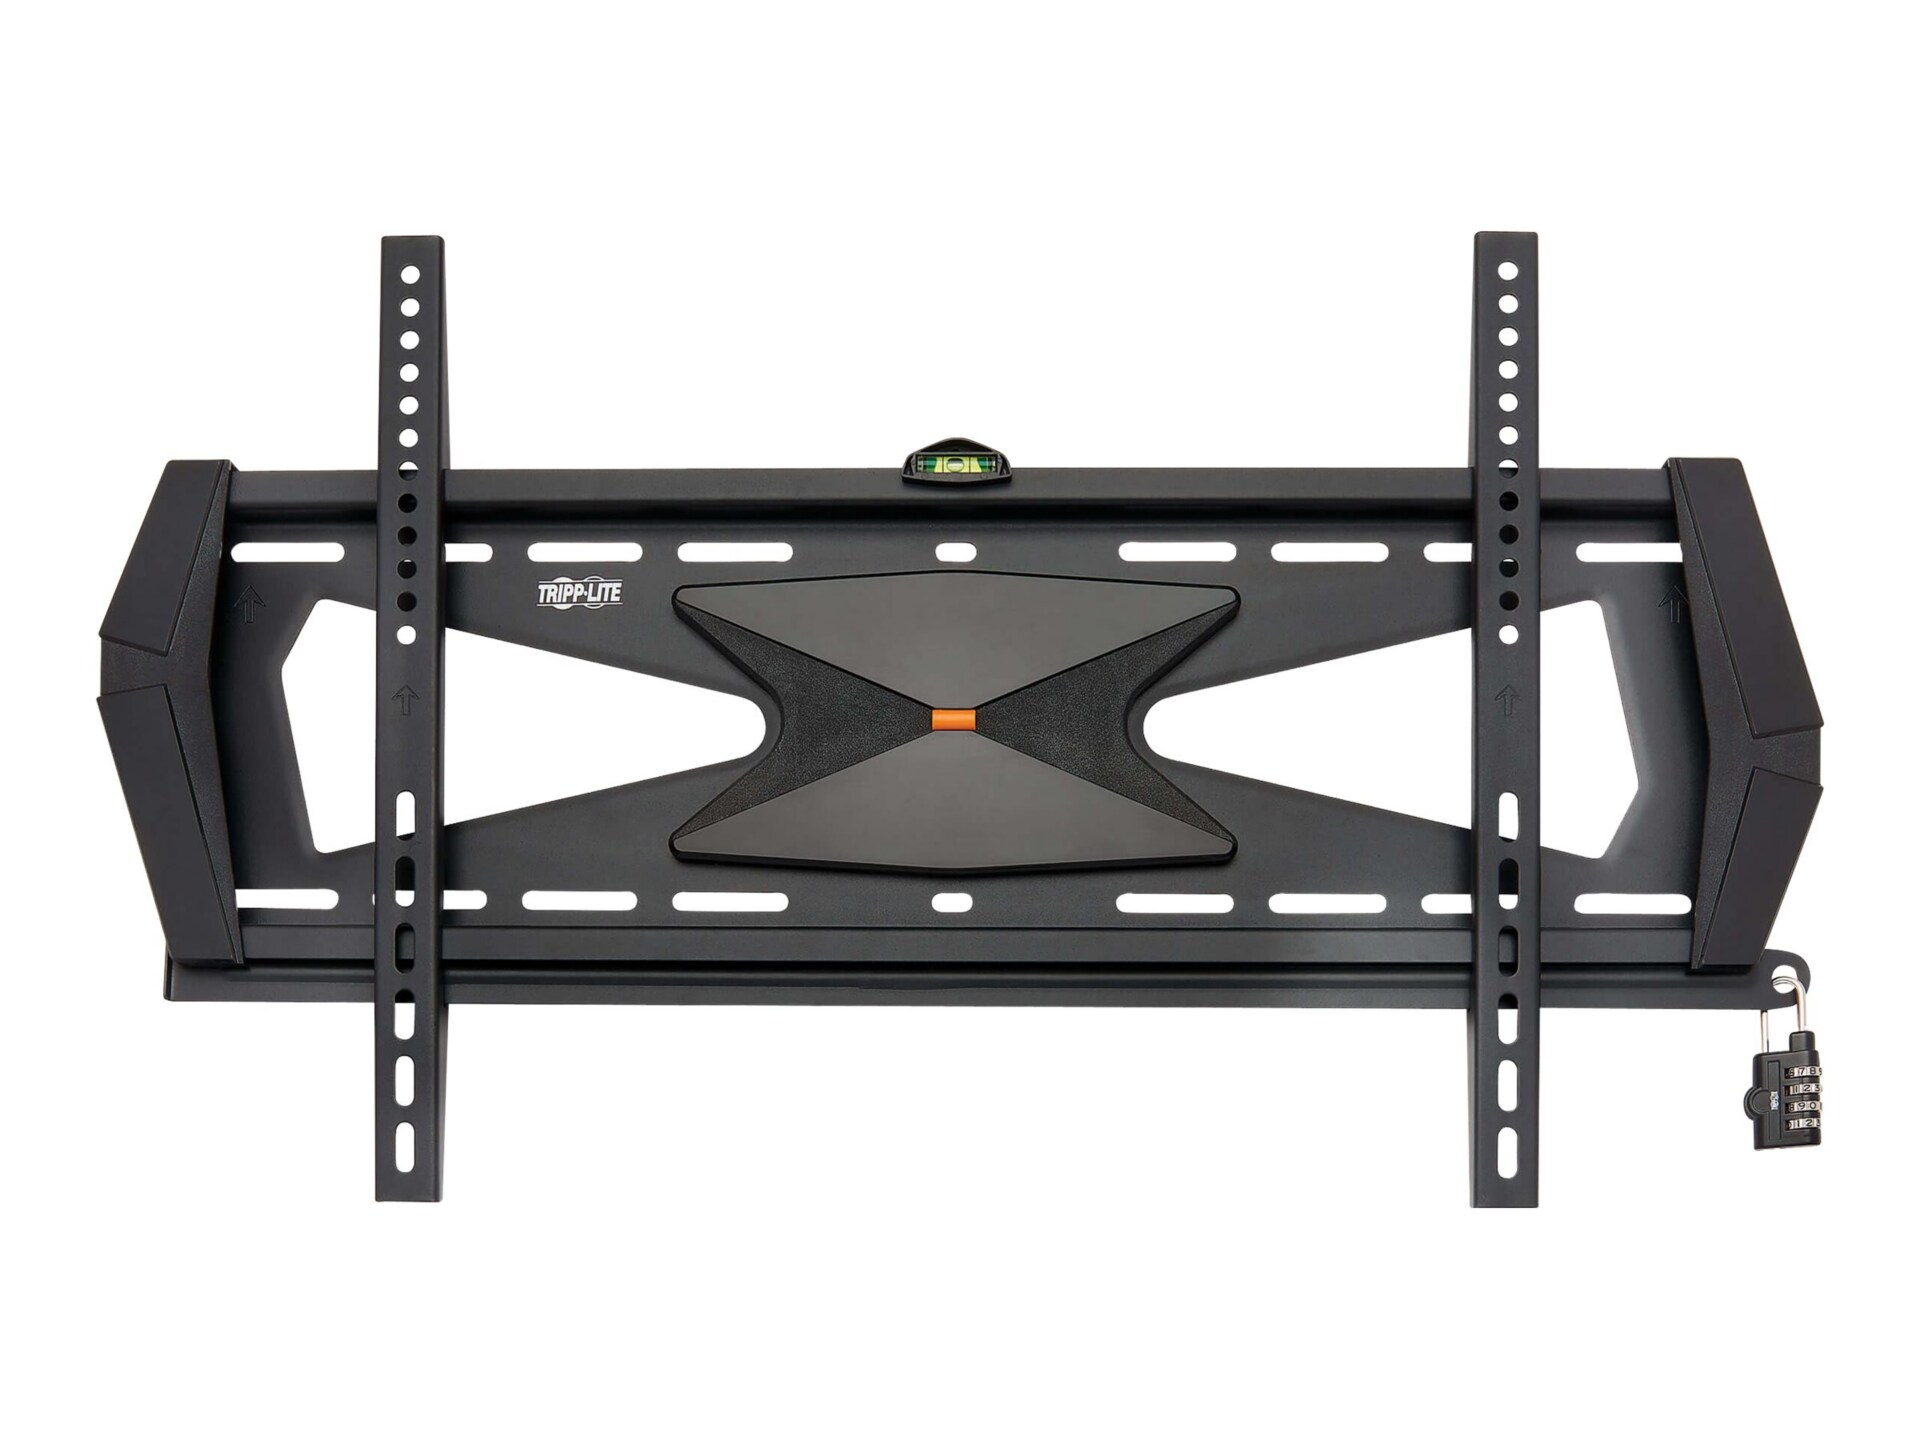 Tripp Lite Heavy-Duty Fixed Security Display TV Wall Mount for 37" to 80" TVs and Monitors, Flat or Curved Screens